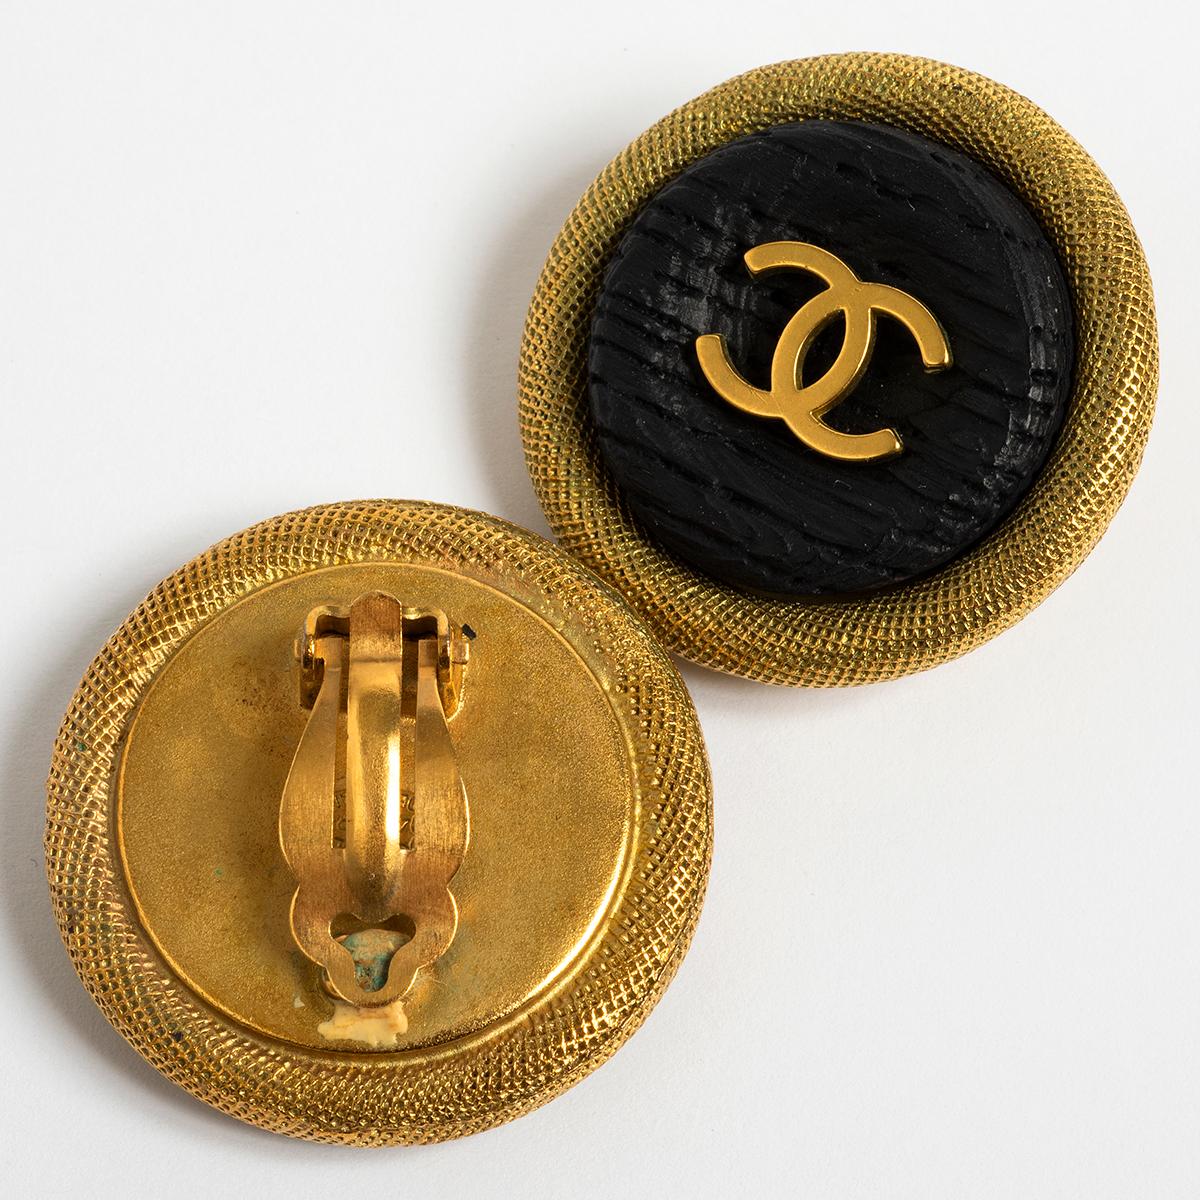 Our vintage Chanel clip on earrings feature a gold metal base and clip, with wood effect centre and prominent CC central logo. These earrings are date stamped Spring 1994. Measuring 35.5mm across, and 8mm deep excluding clip, these are presented in